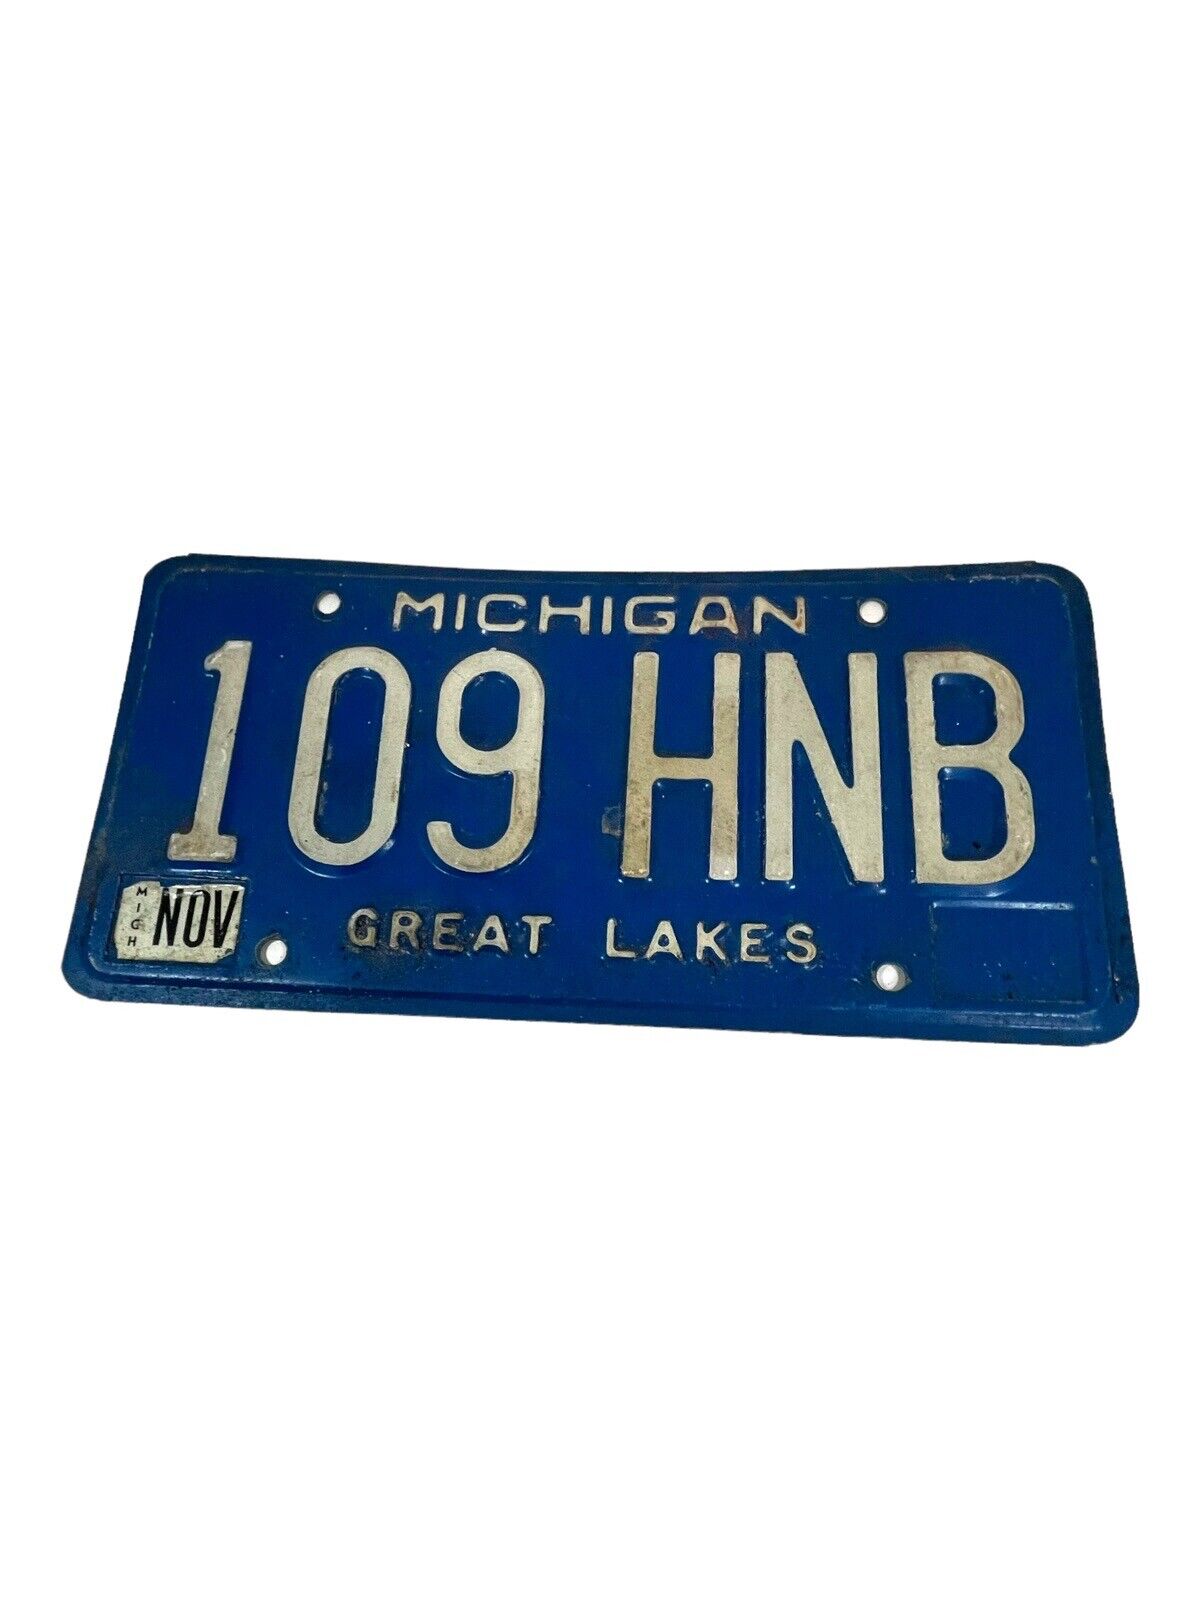 1987 Michigan License Plate Great Lakes Blue # 983 VCW Vintage Tag Man Cave Blue